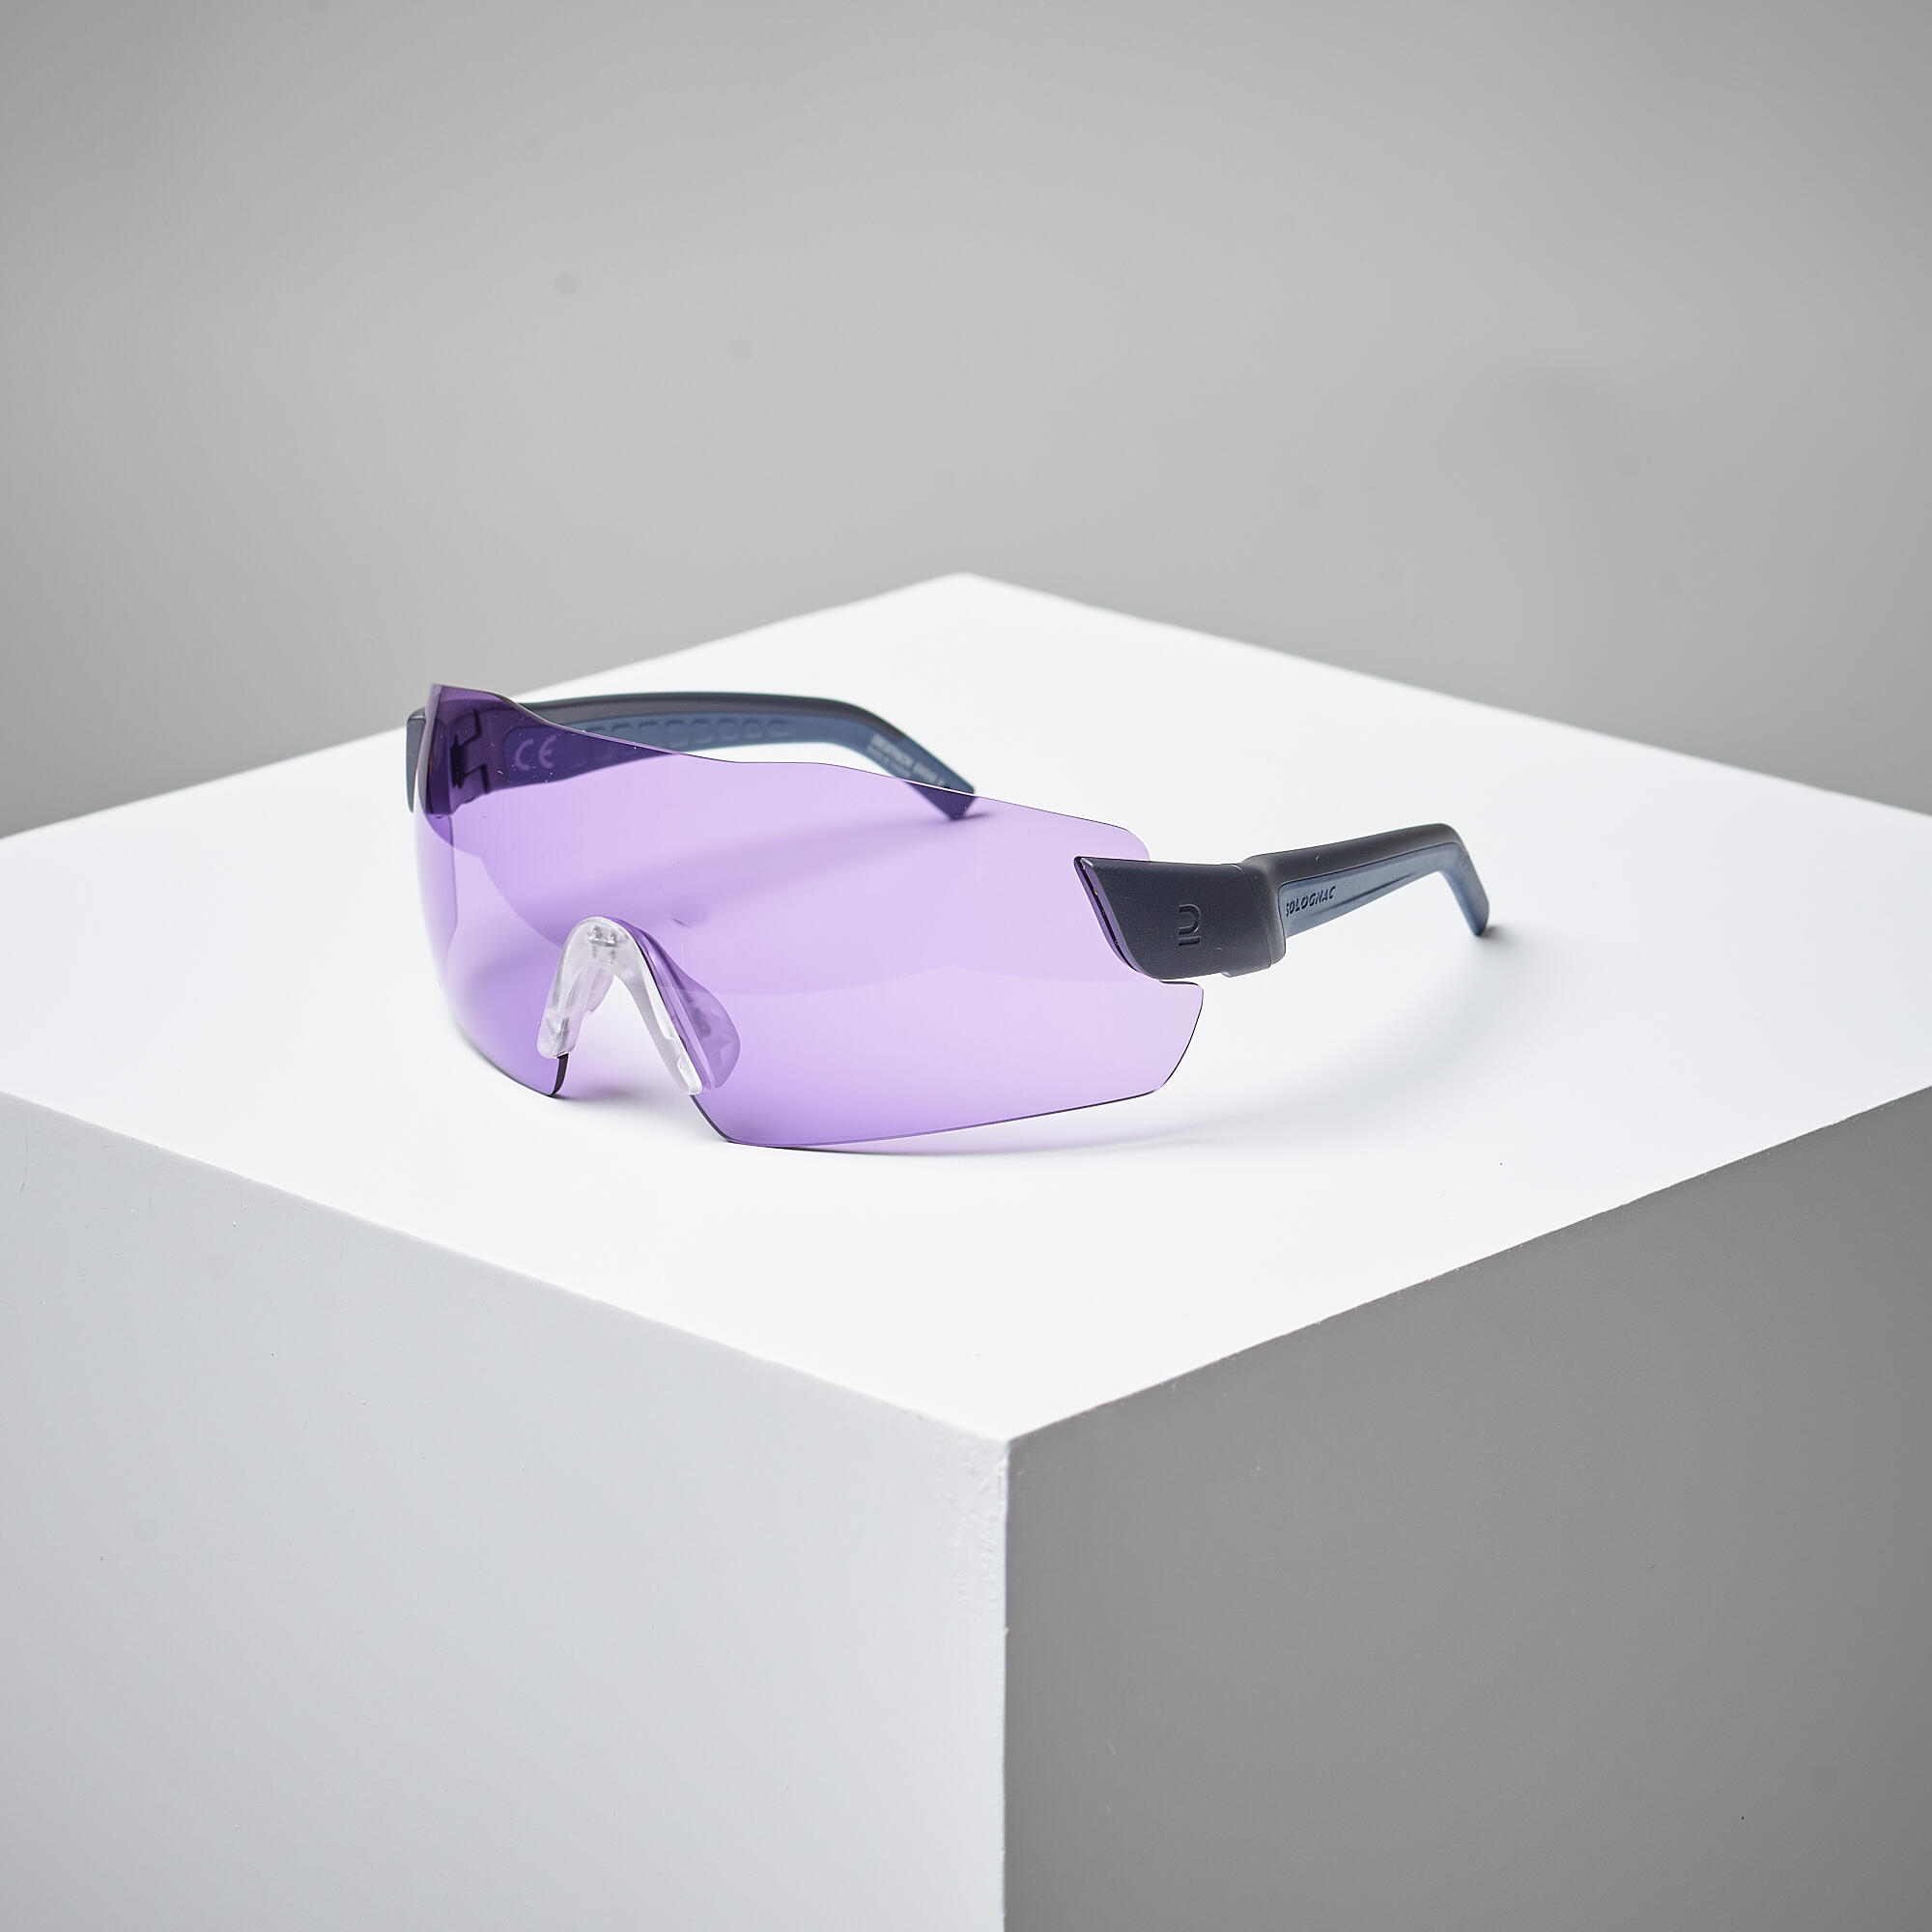 SAFETY GLASSES FOR CLAY PIGEON SHOOTING 500 PURPLE CATEGORY 2 1/6